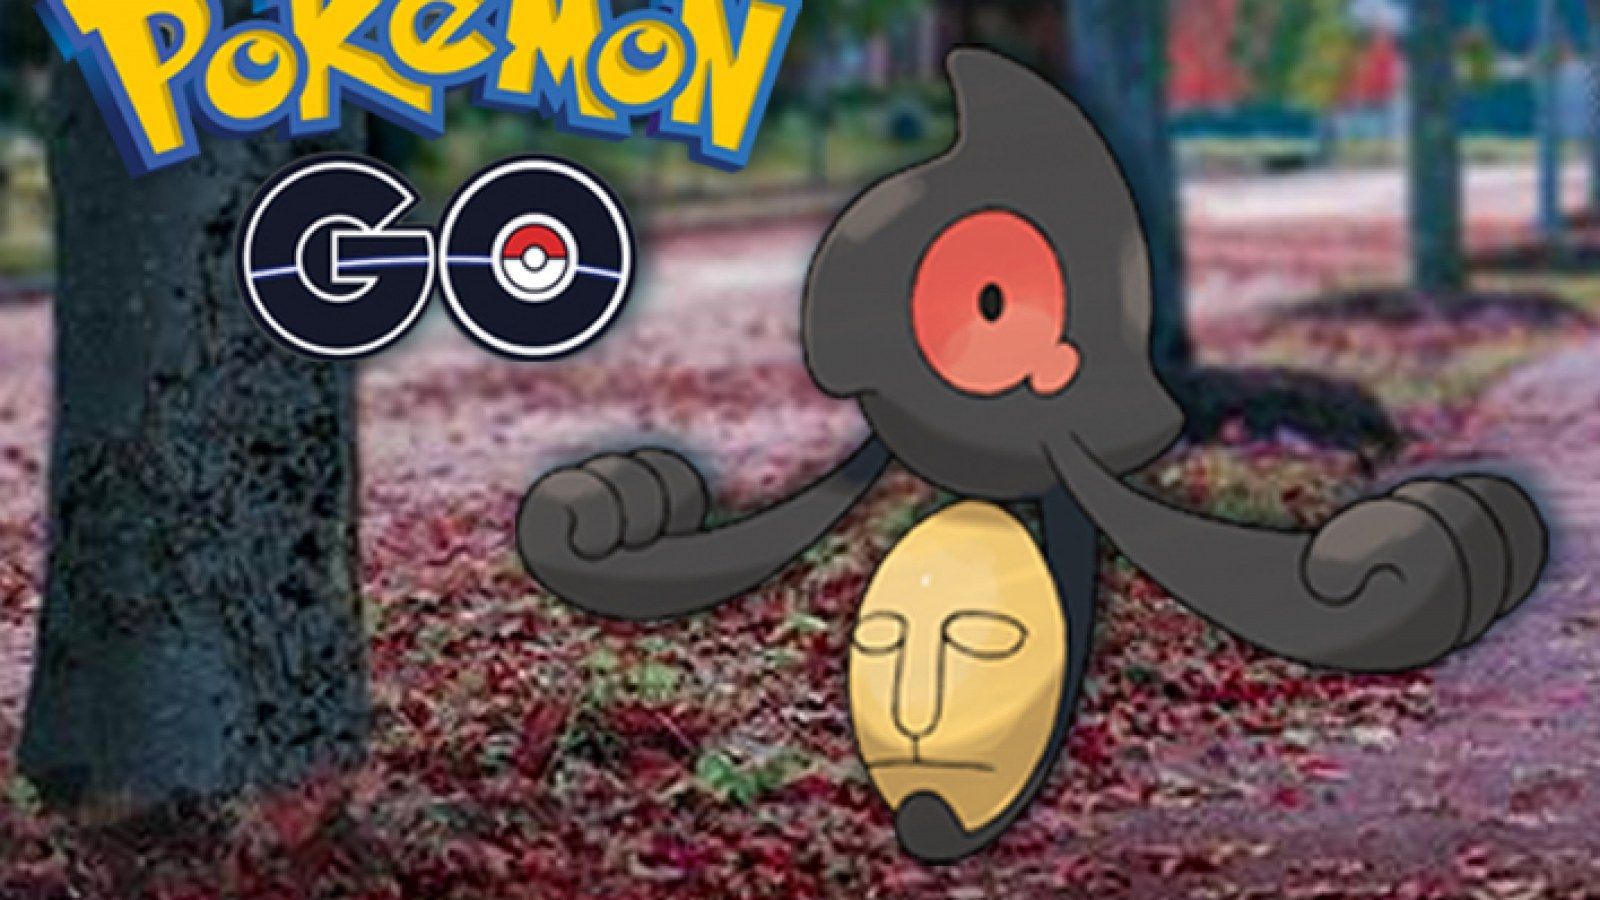 Pokémon Go' Halloween 2019 Event: Start Time, Shiny Yamask and Everything You Need to Know